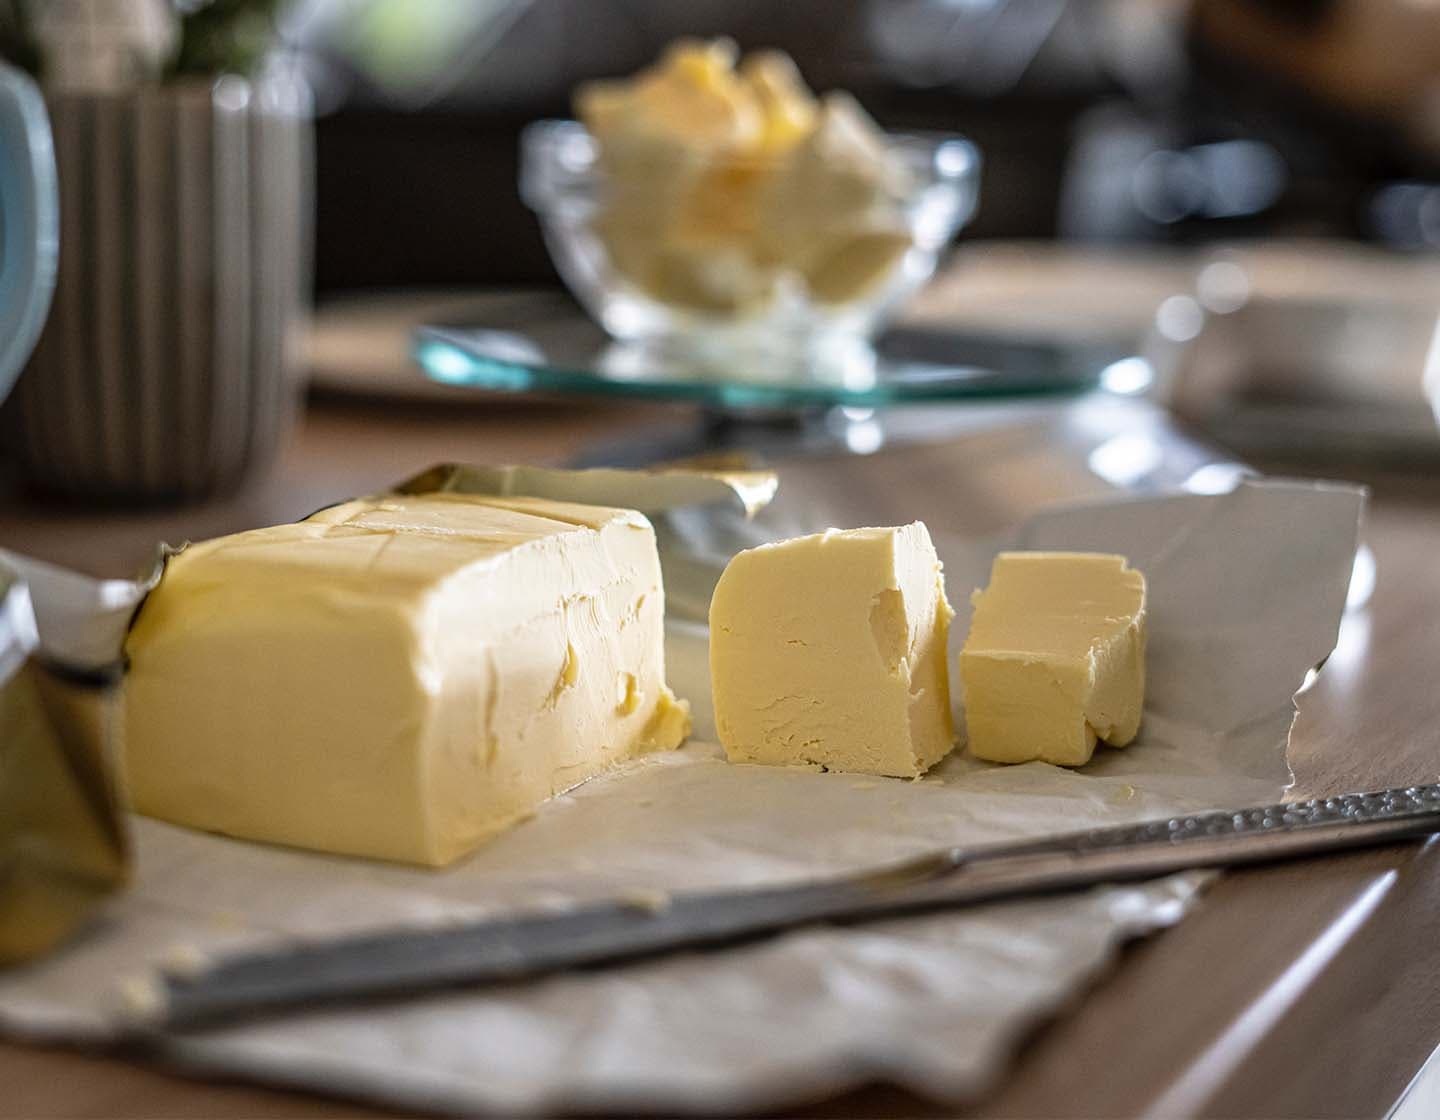 Large pieces of butter on a countertop